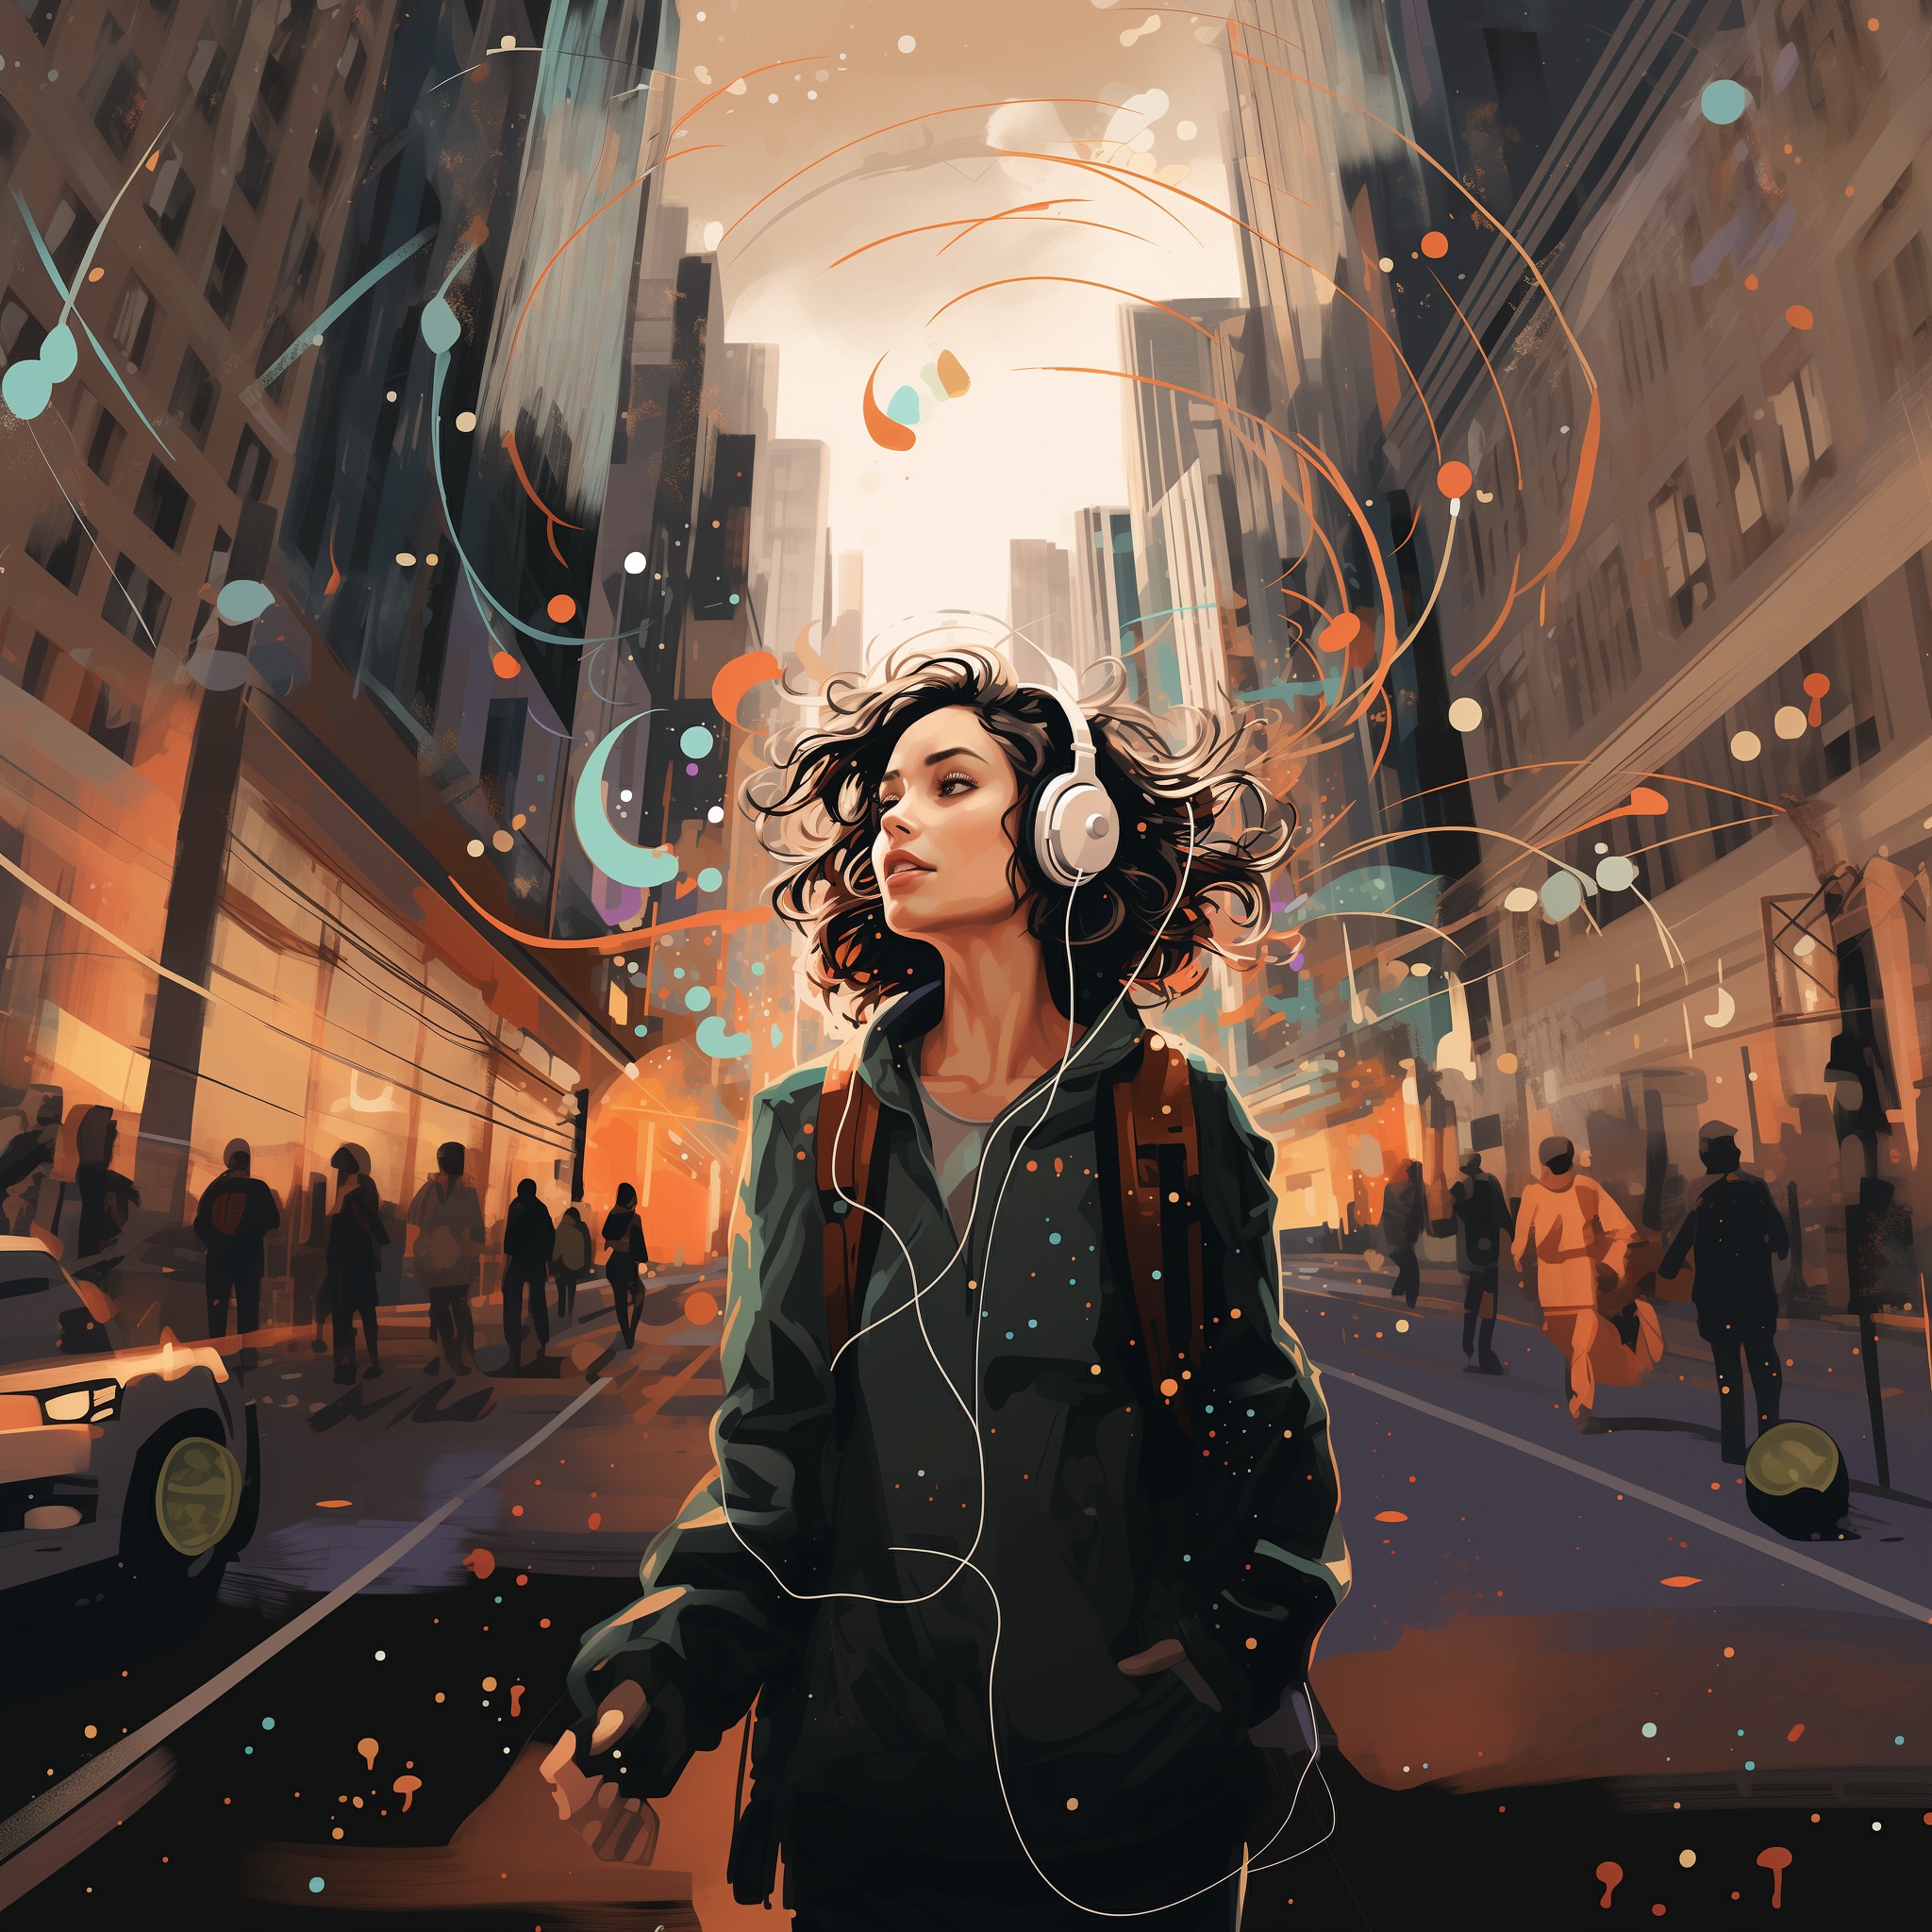 MastaBaba_an_illustration_of_a_young_woman_listening_to_headpho_9c89e91a-594d-4826-8a5c-6299e2e57538